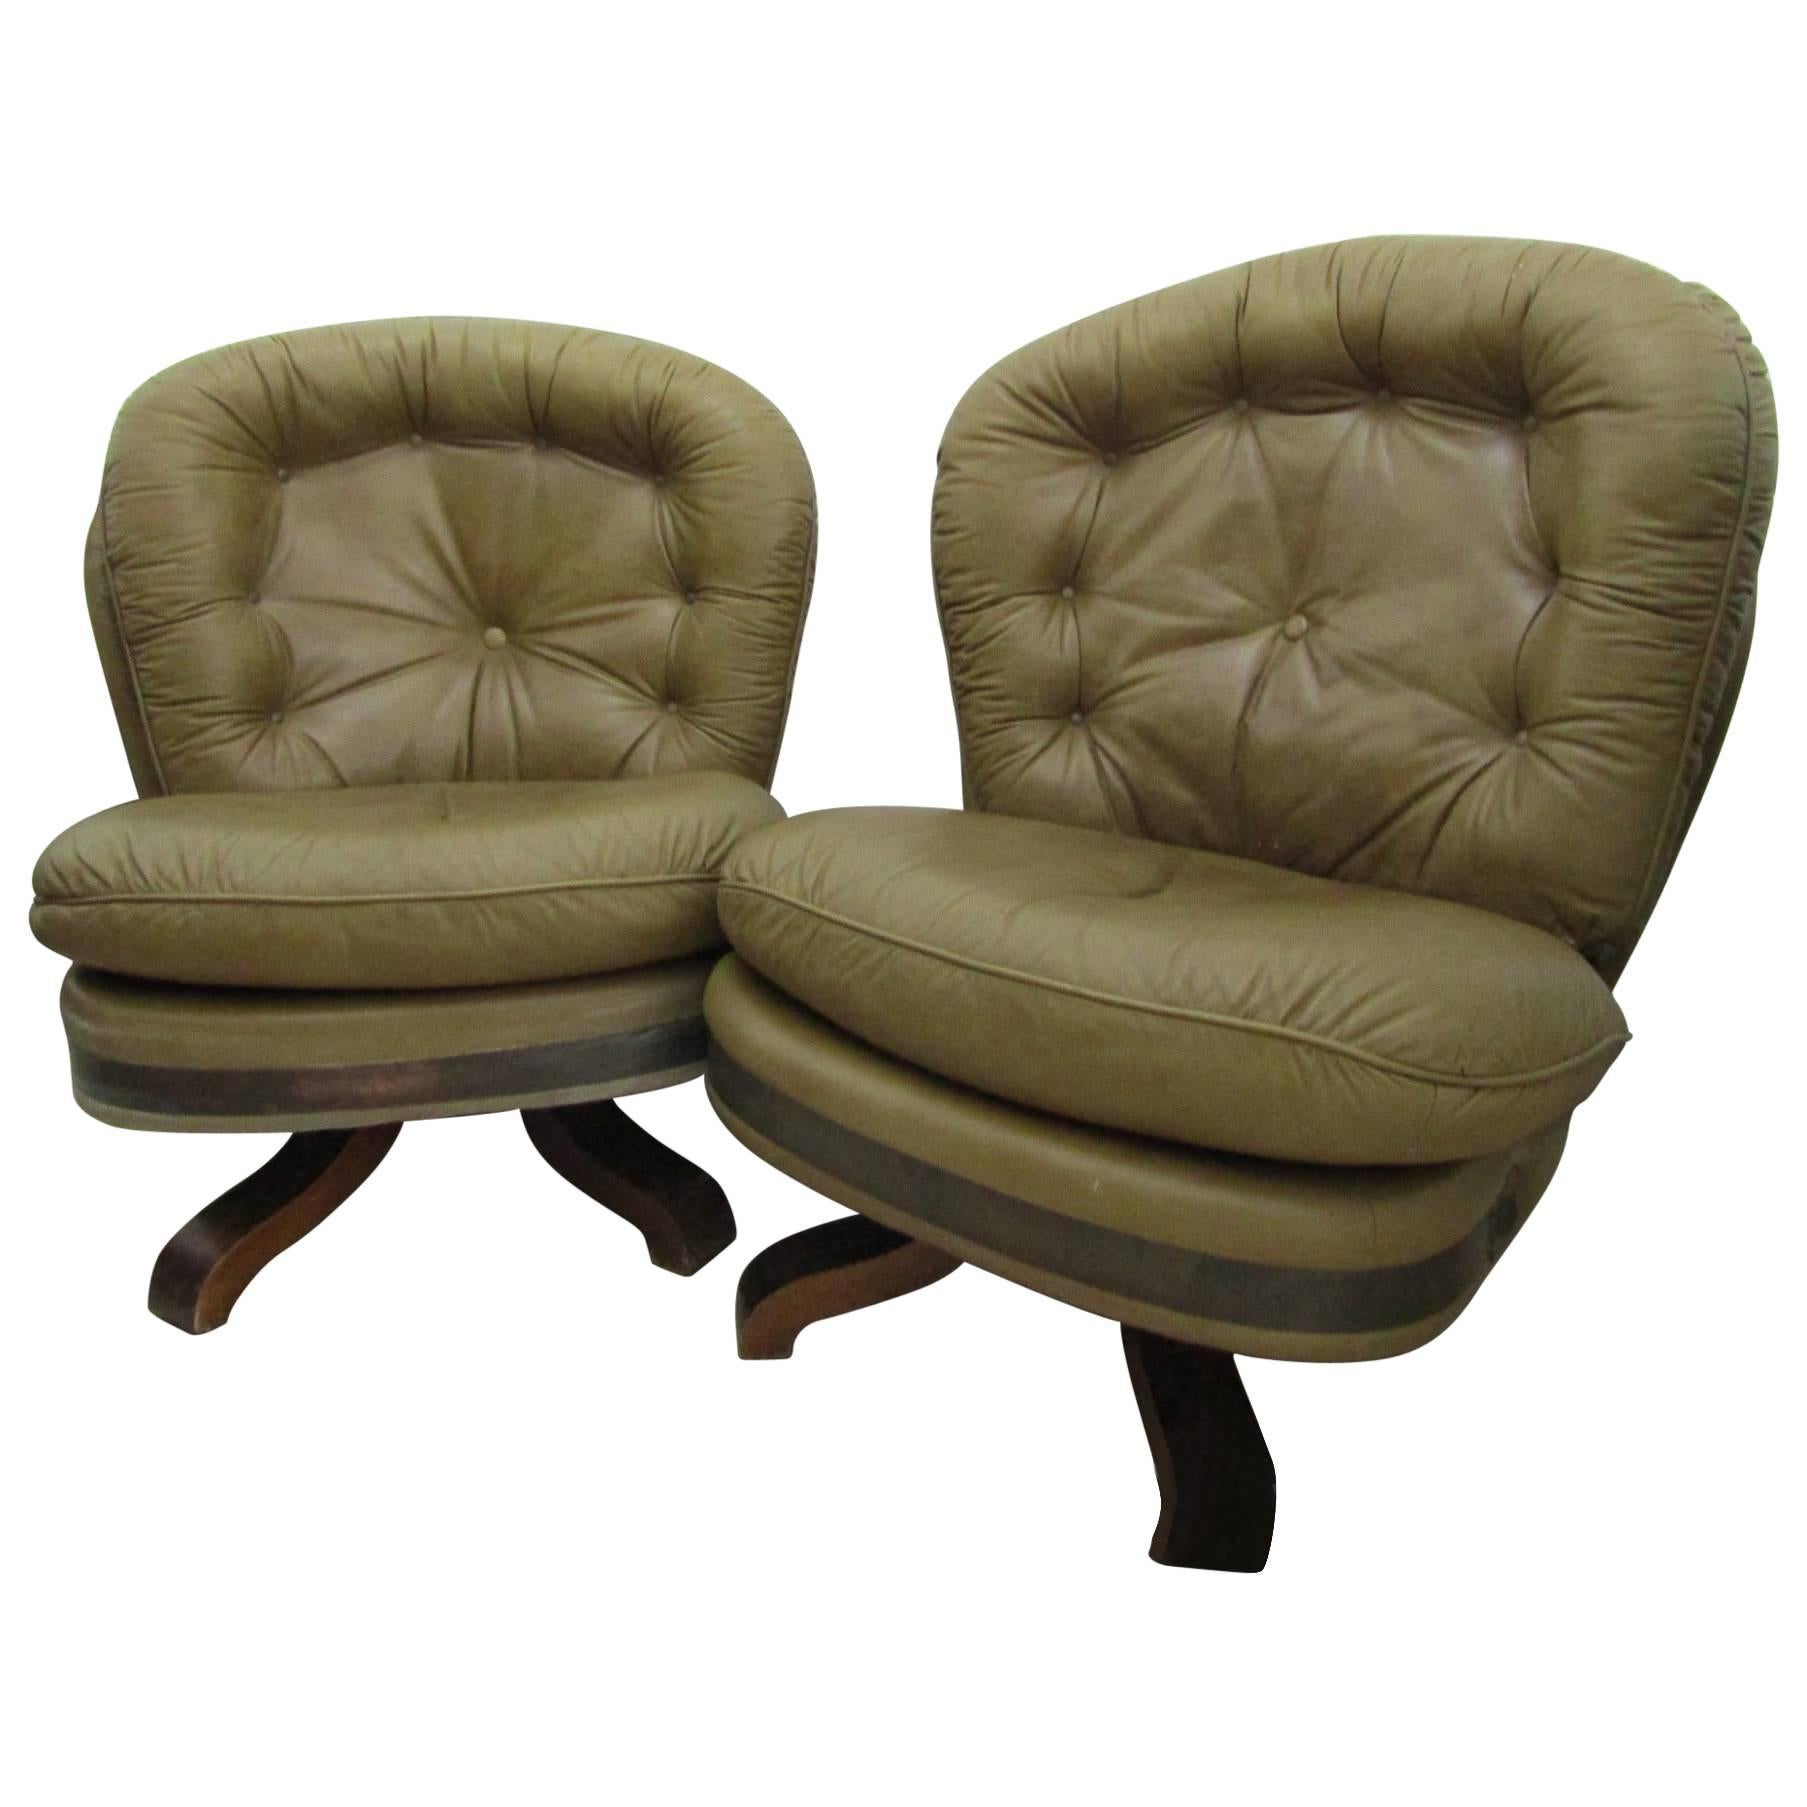 Pair of Majestic Design Armchairs